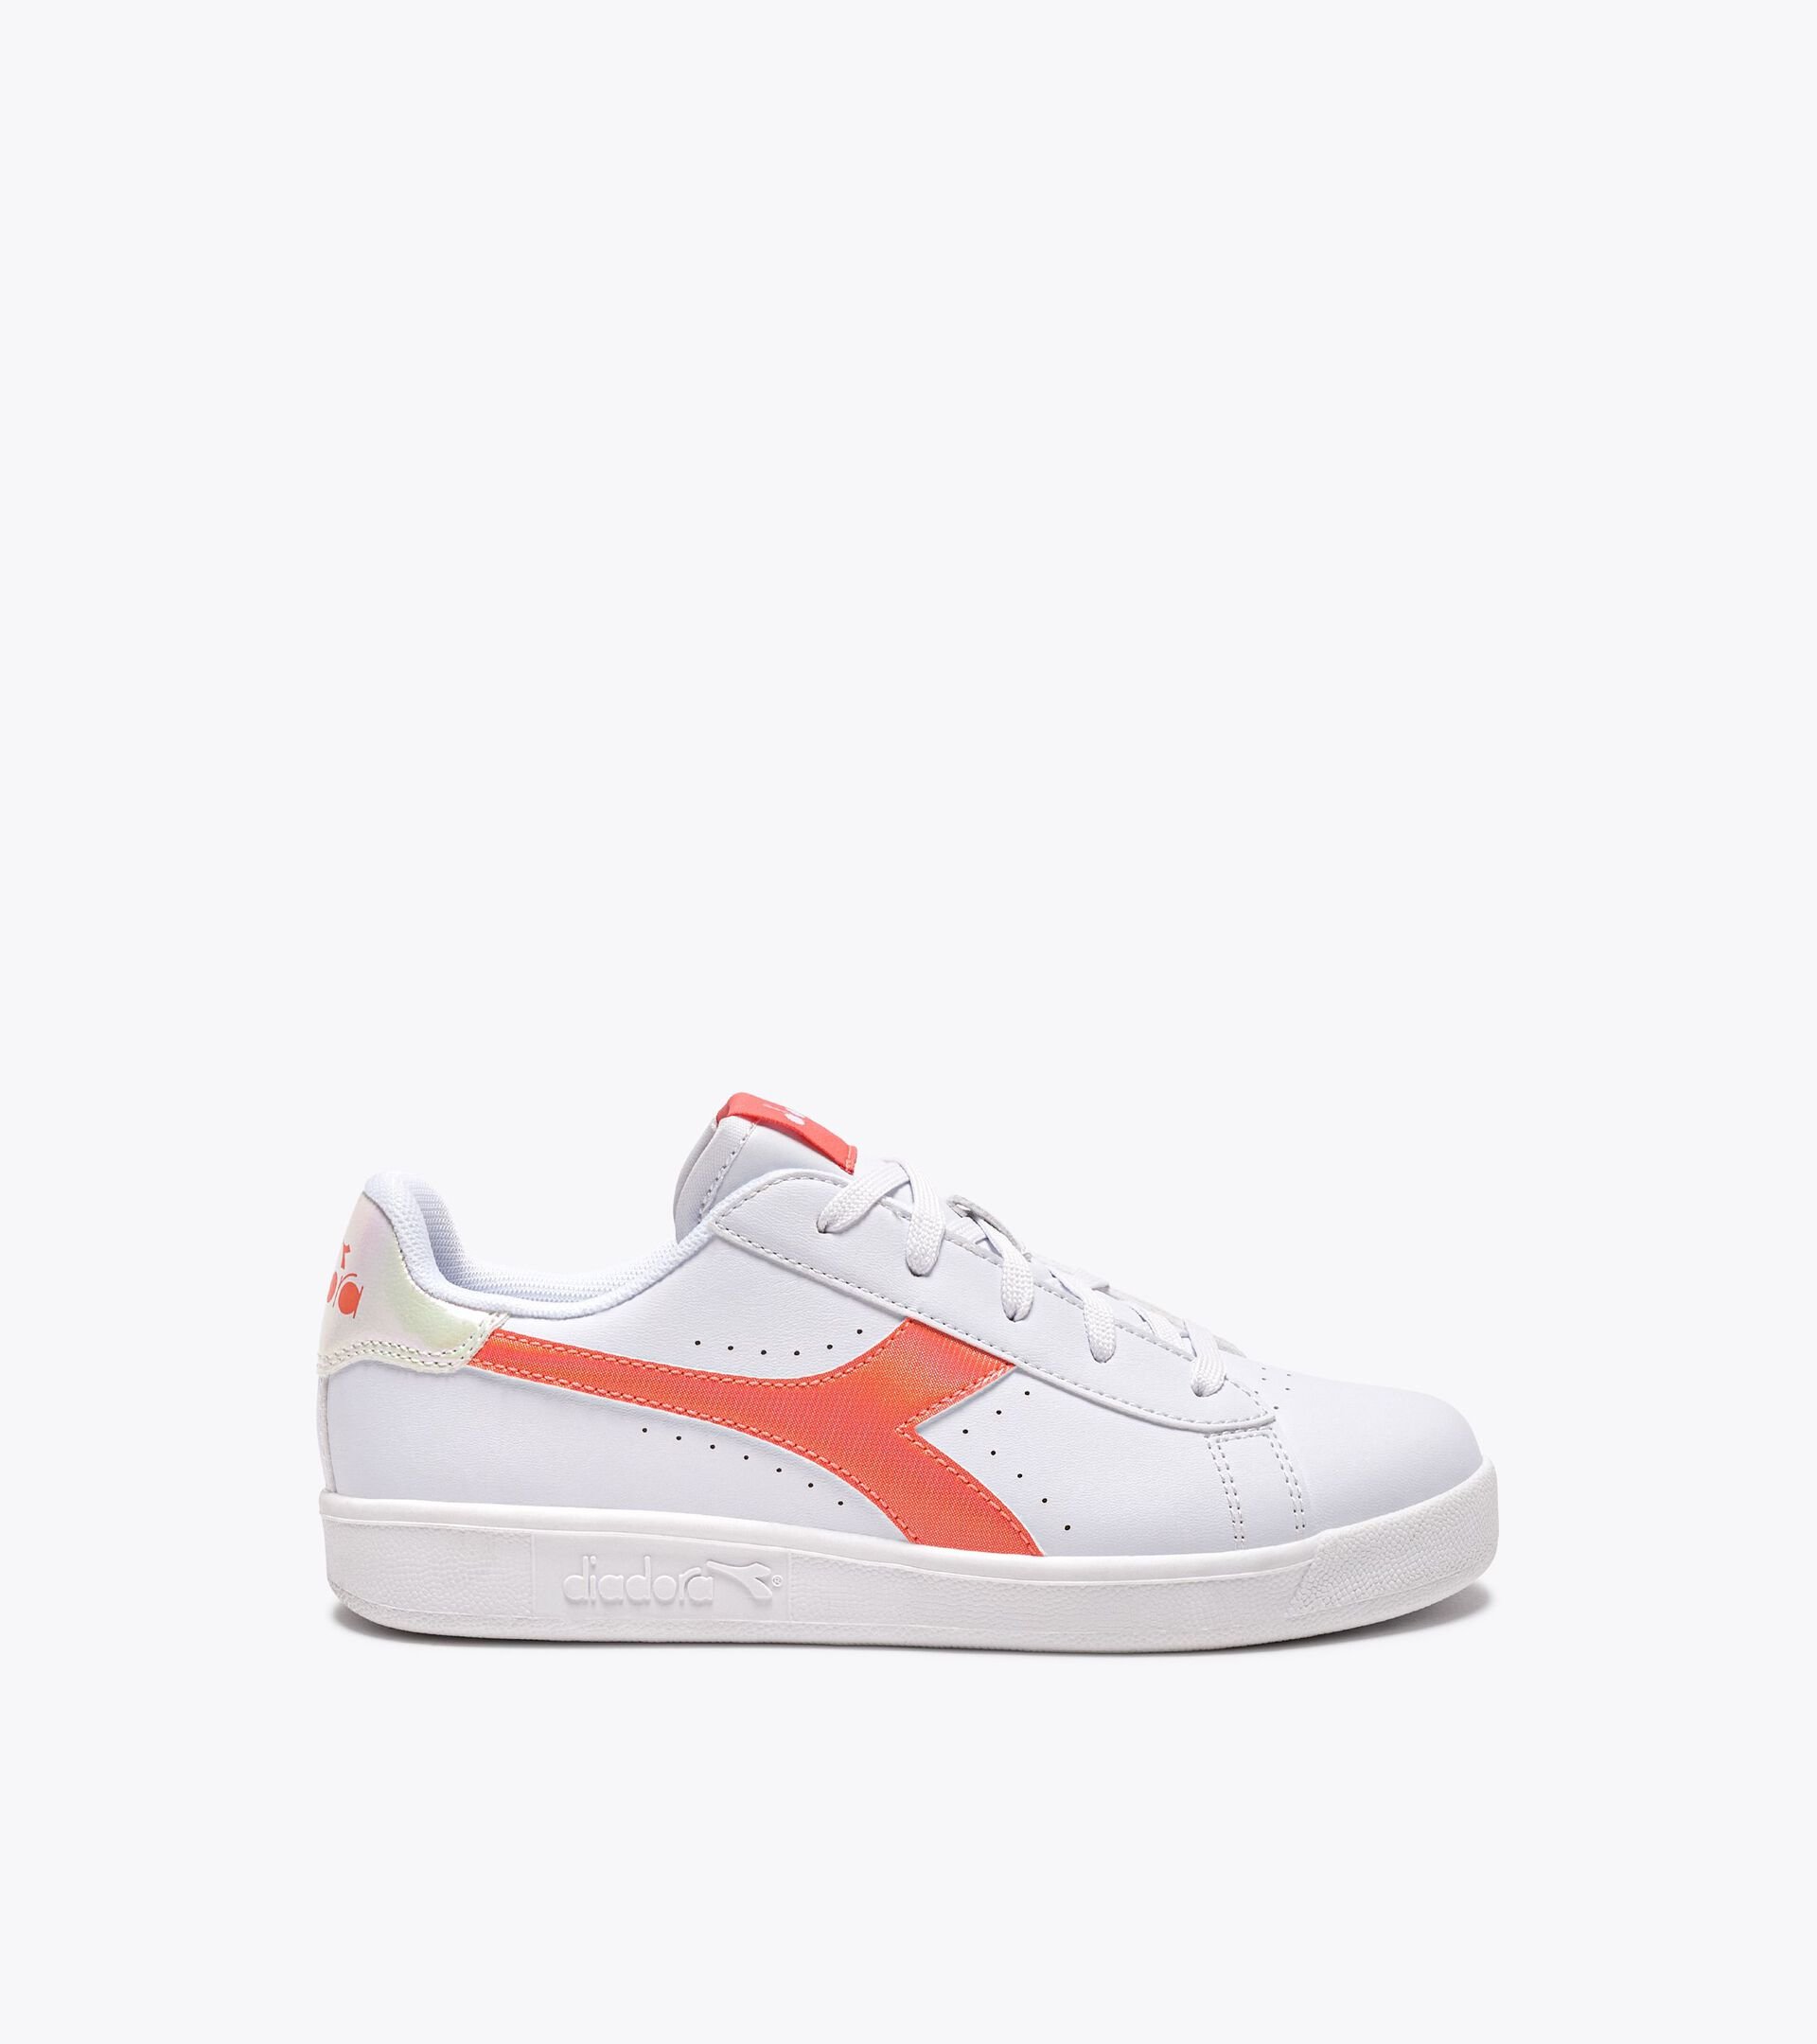 Sports shoes - Youth 8-16 years GAME P GS GIRL FUSION CORAL/WHITE - Diadora